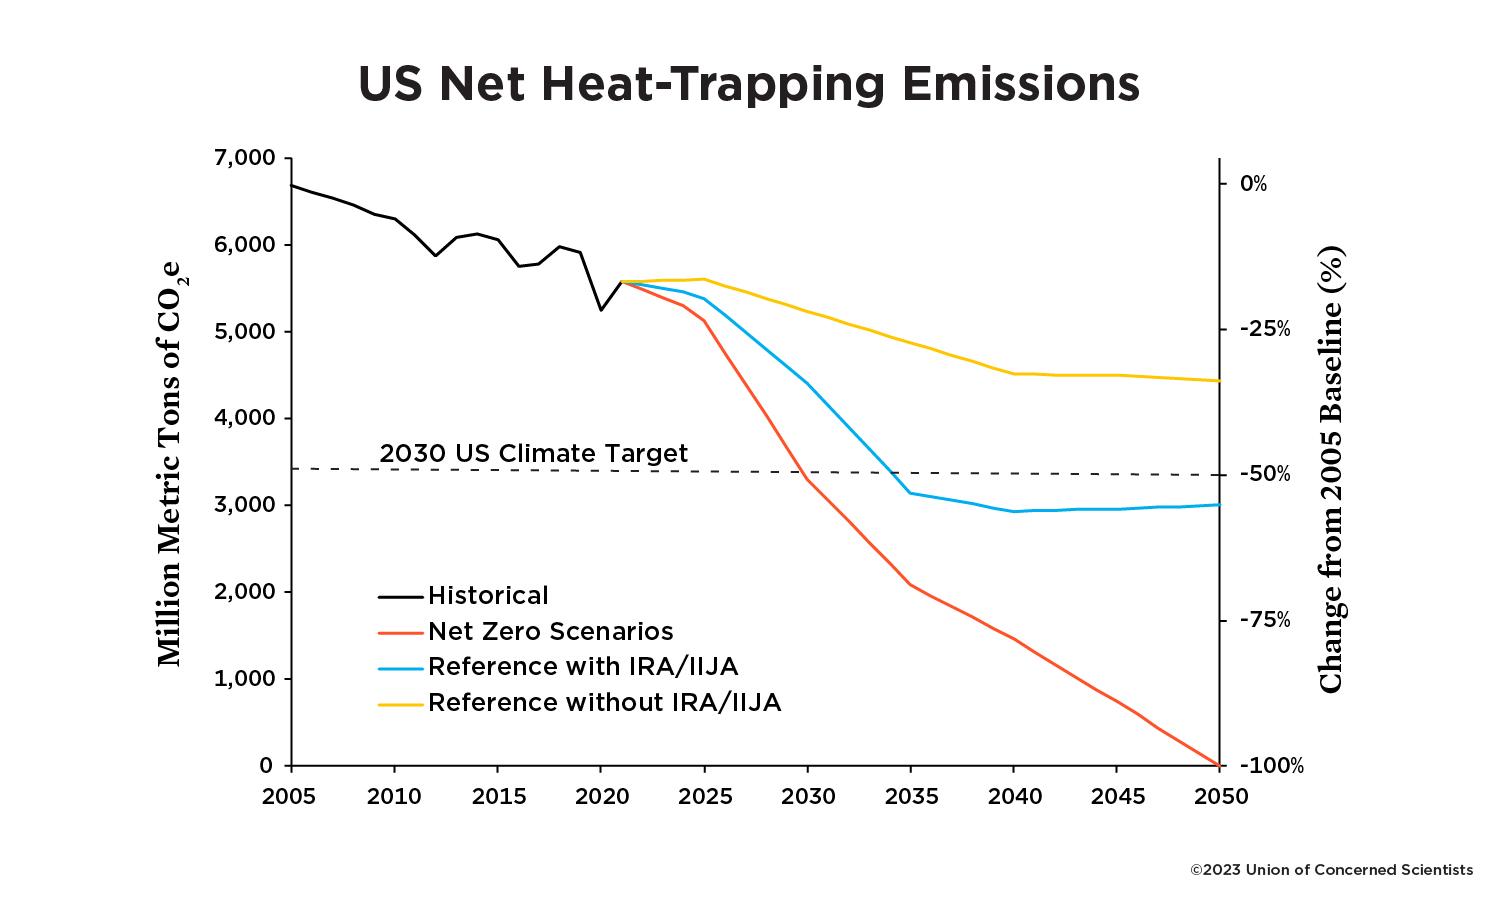 A line chart that compares US emissions over time under several different scenarios